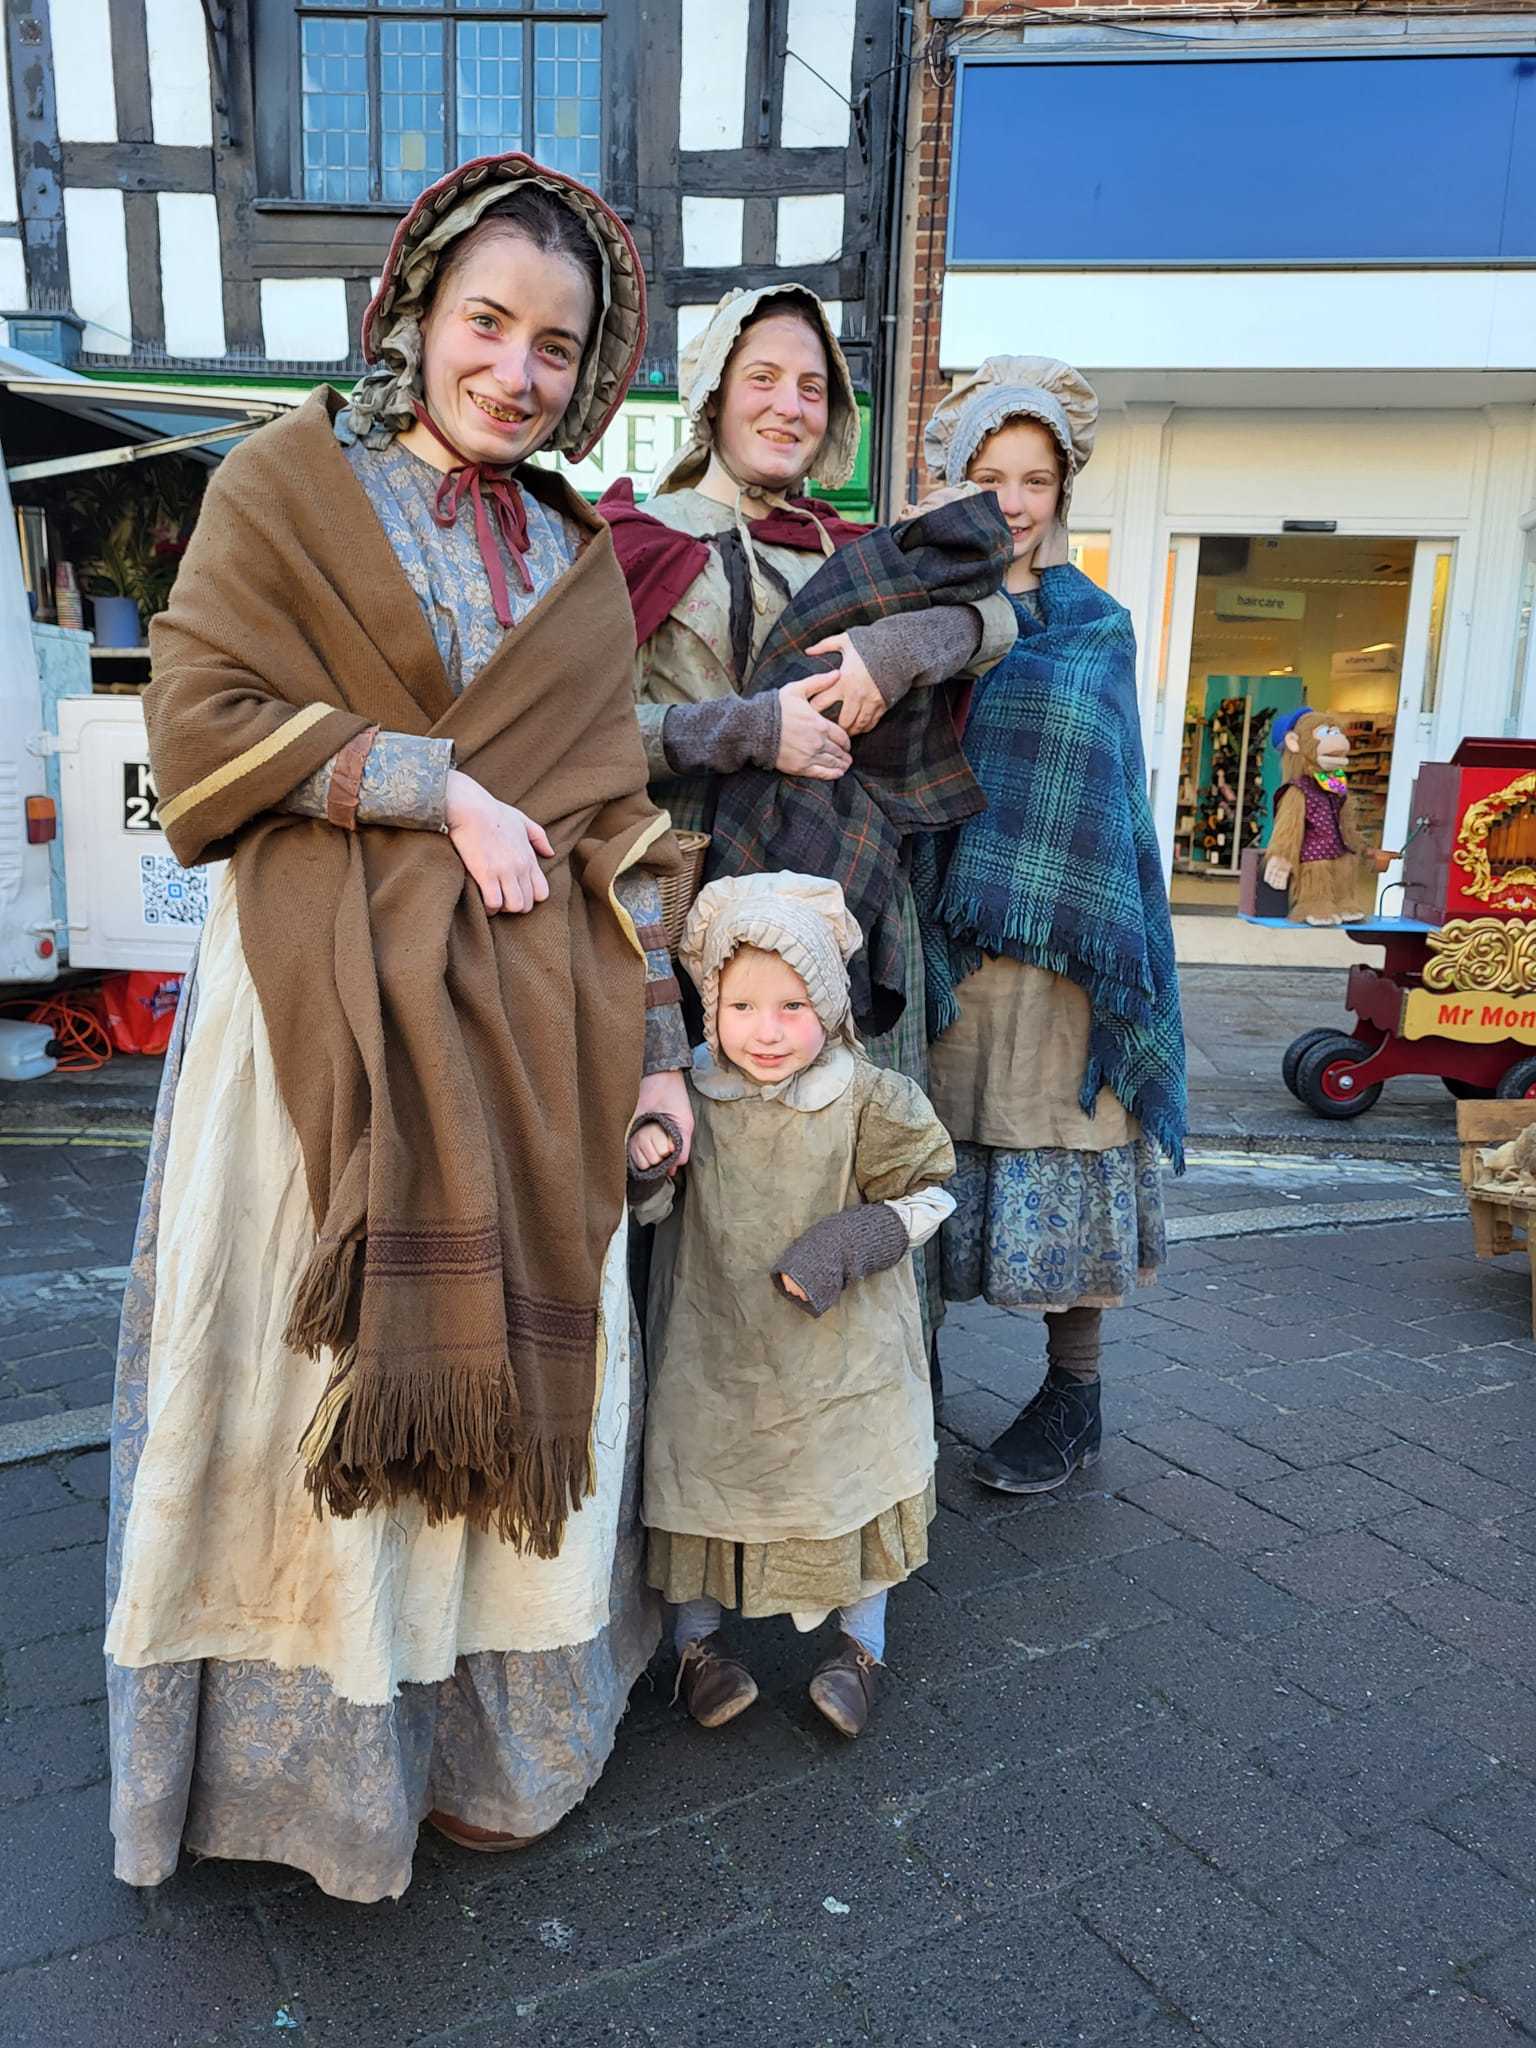 There were several people walking about the streets dressed up in period clothes. Picture: Virginie Alexandra Jacquet/Hereford Times Camera Club